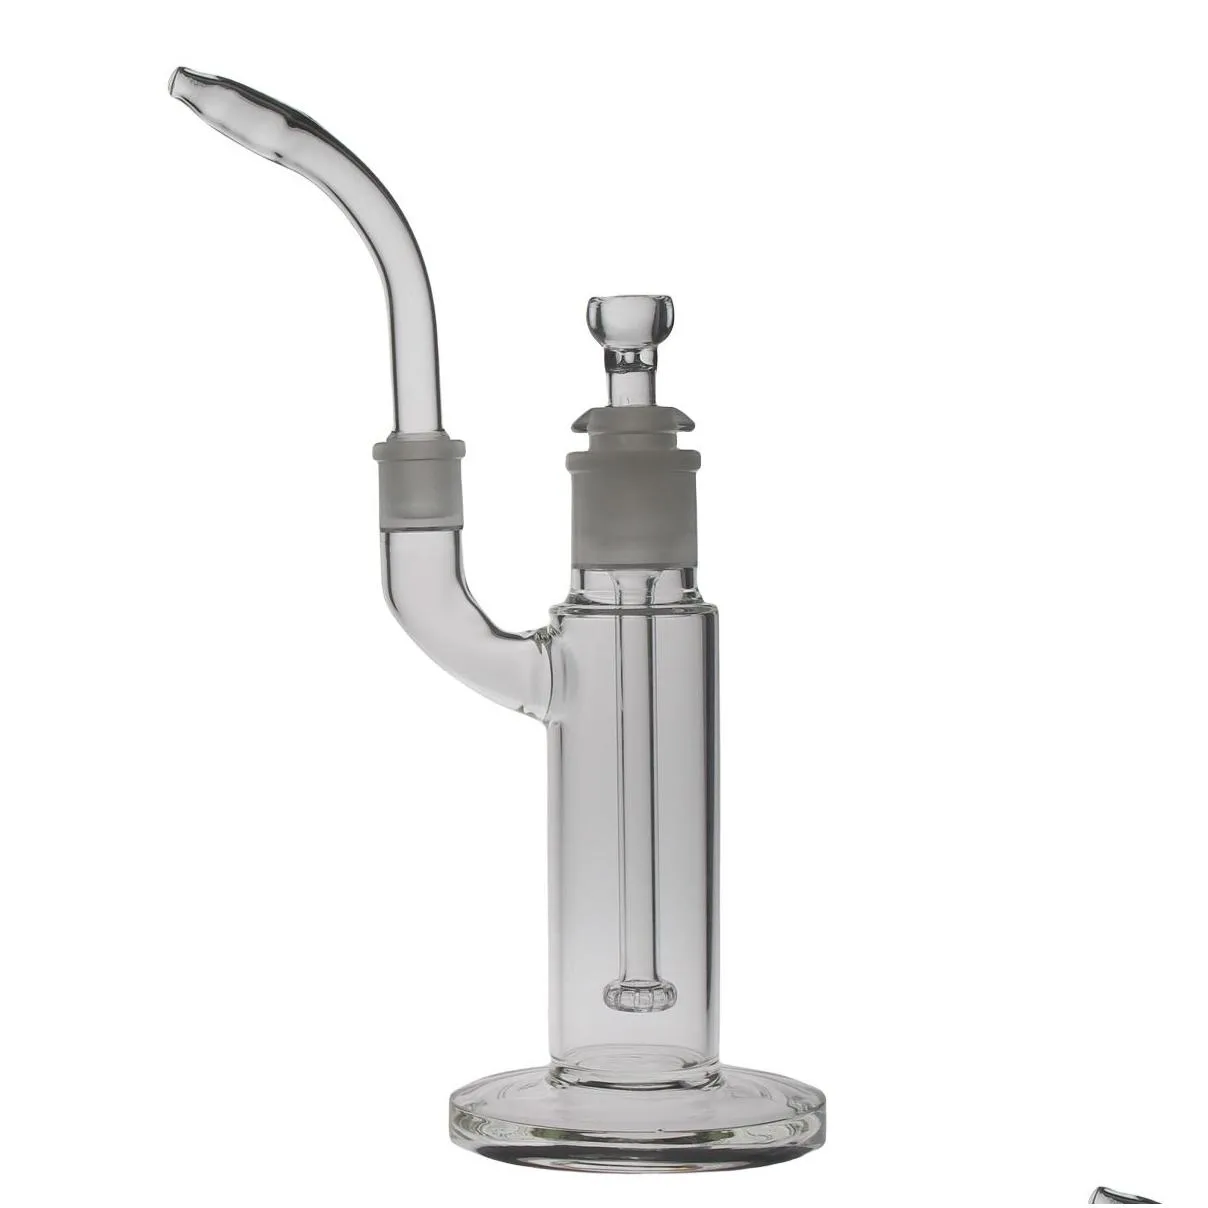 SAML GLASS 35cm Height Glass Bong Diffusion Smoking Water Pipe Added Tall With Ash Catcher Dab Rig Vapor Joint size 18.8mm PG3057(Improved